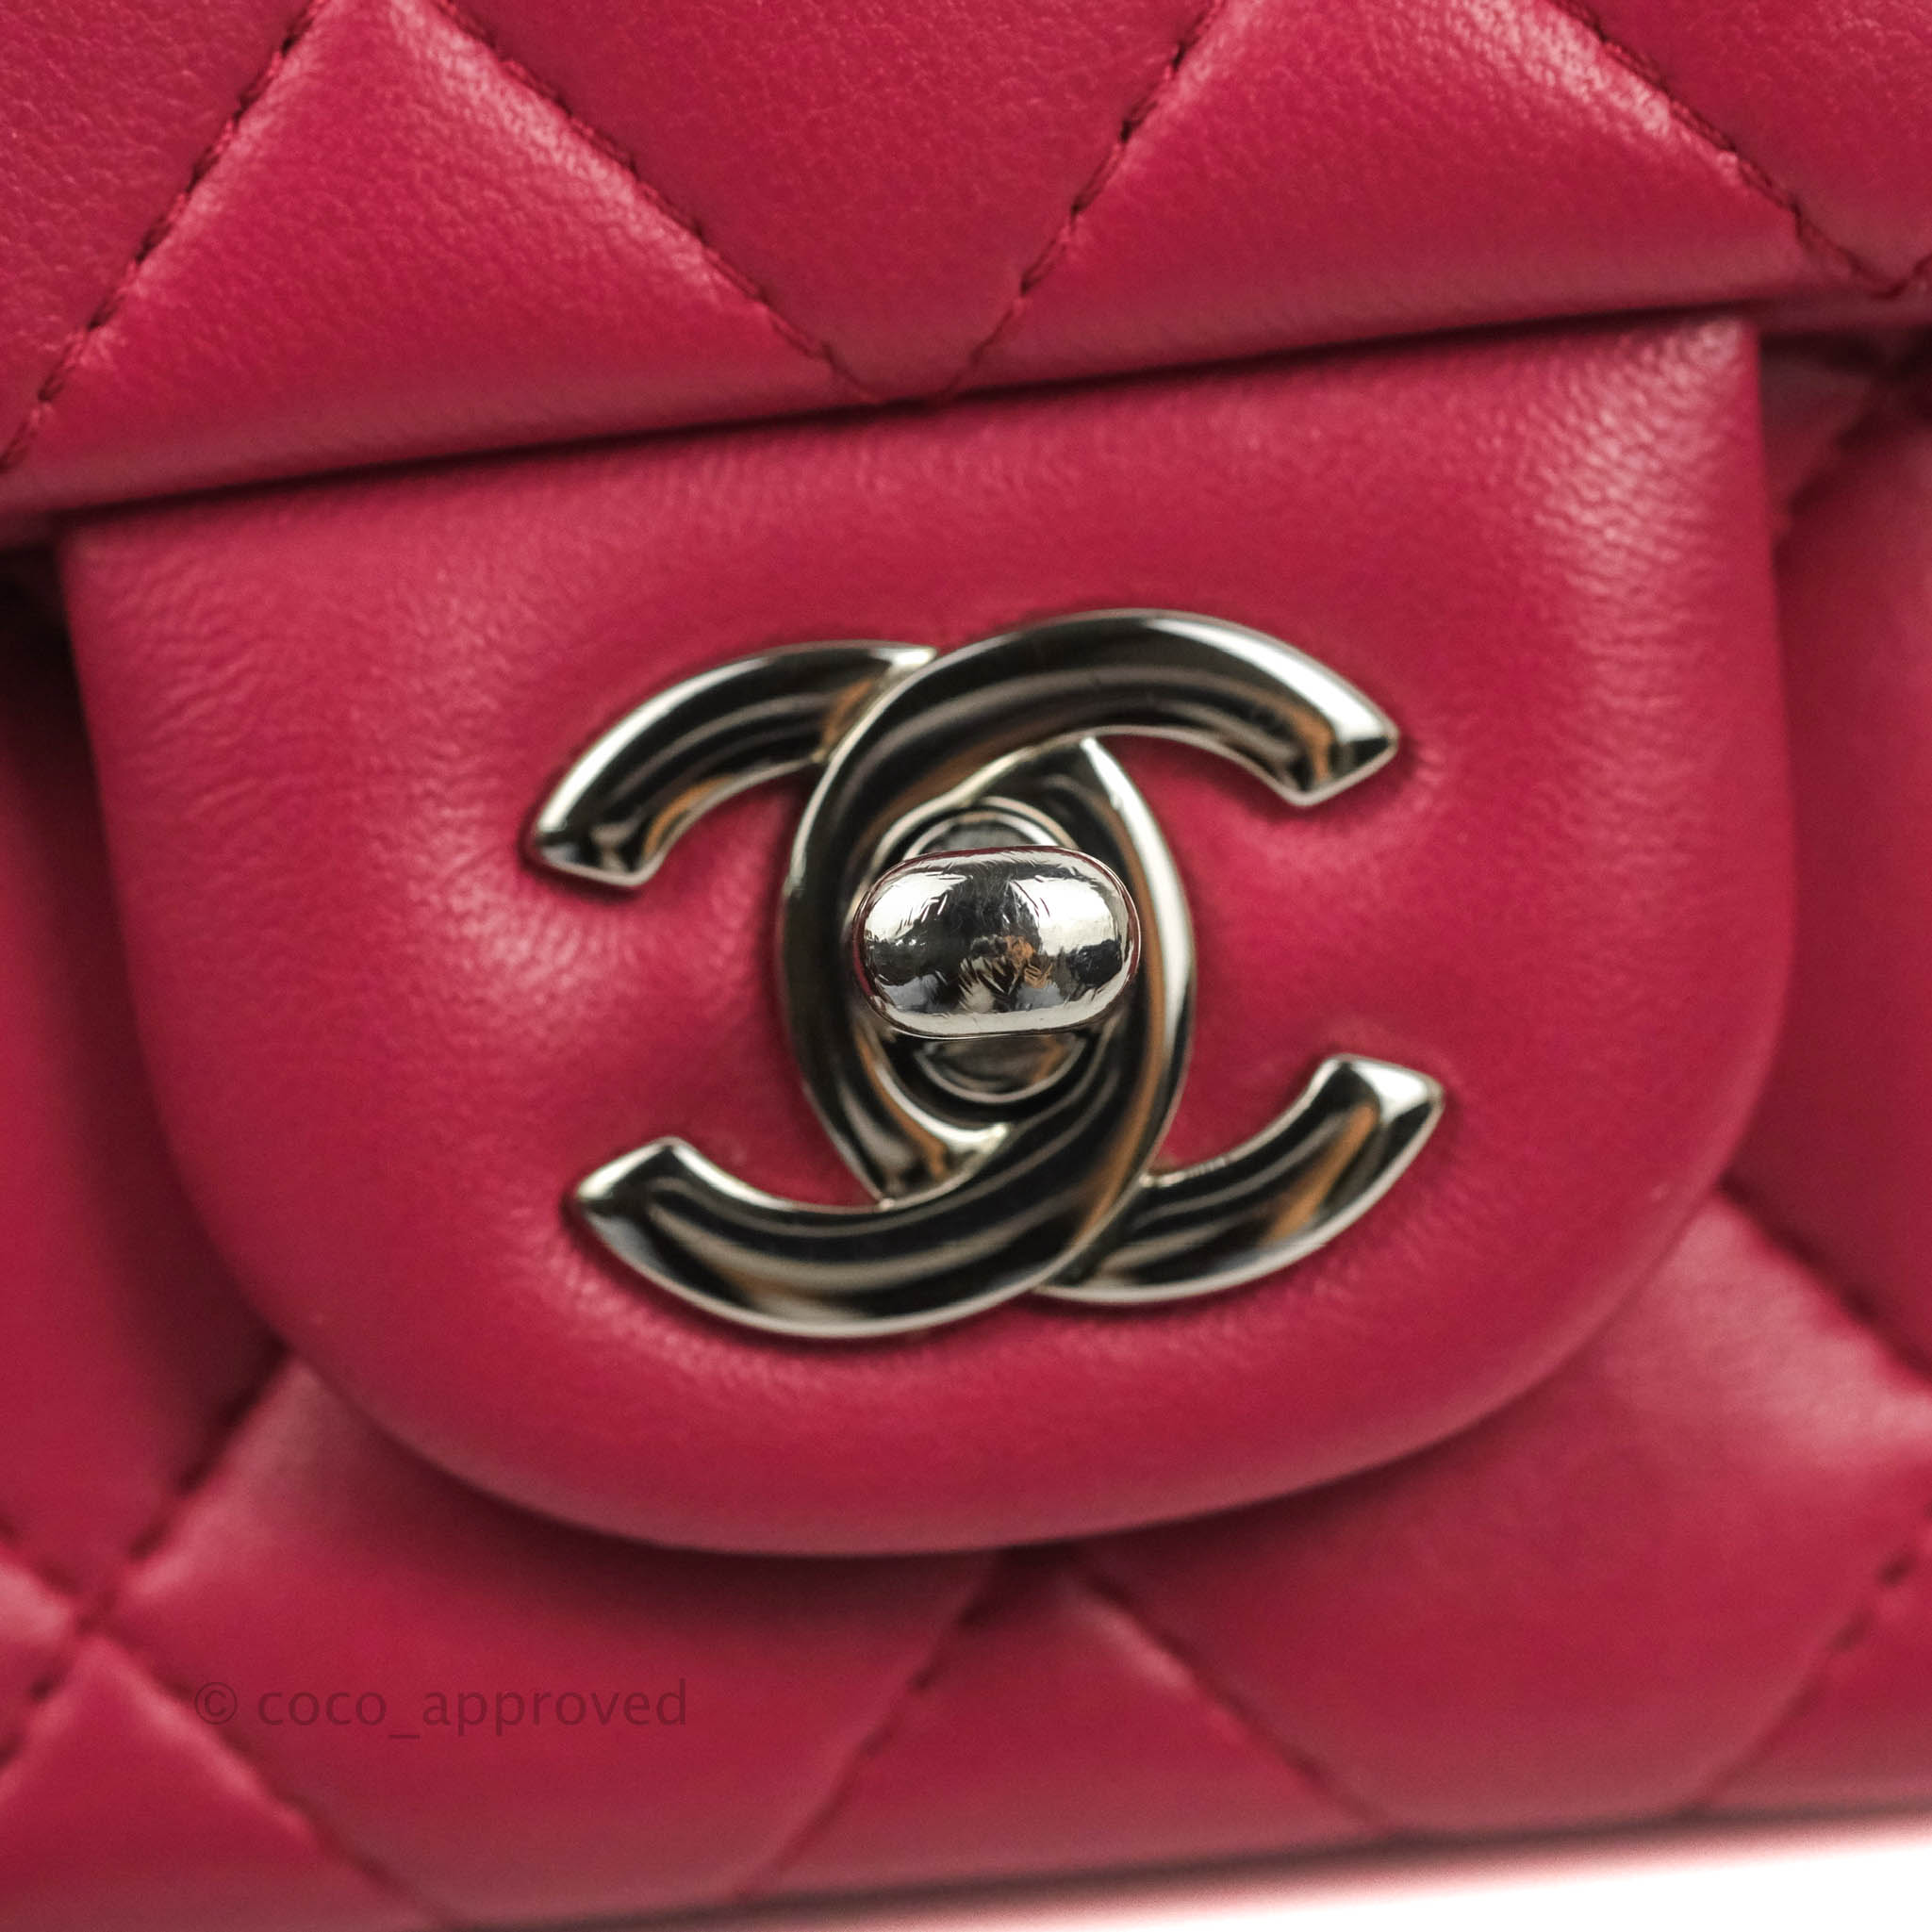 18B Raspberry Red Caviar Quilted Mini Rectangular Single Flap with Light  Gold Hardware